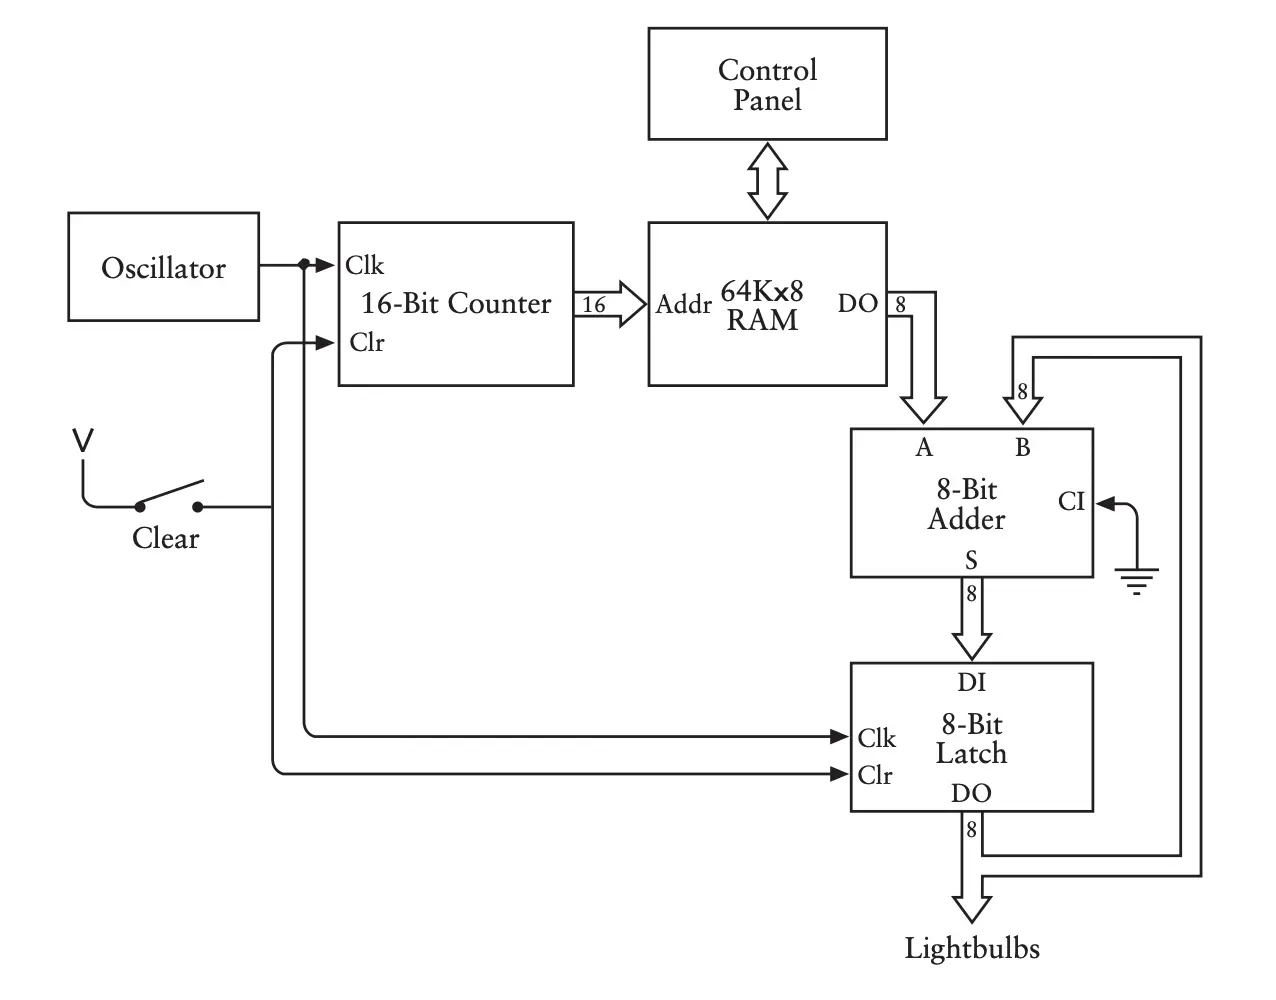 Circuit with memory, adder with accumulation and control panel for entering values